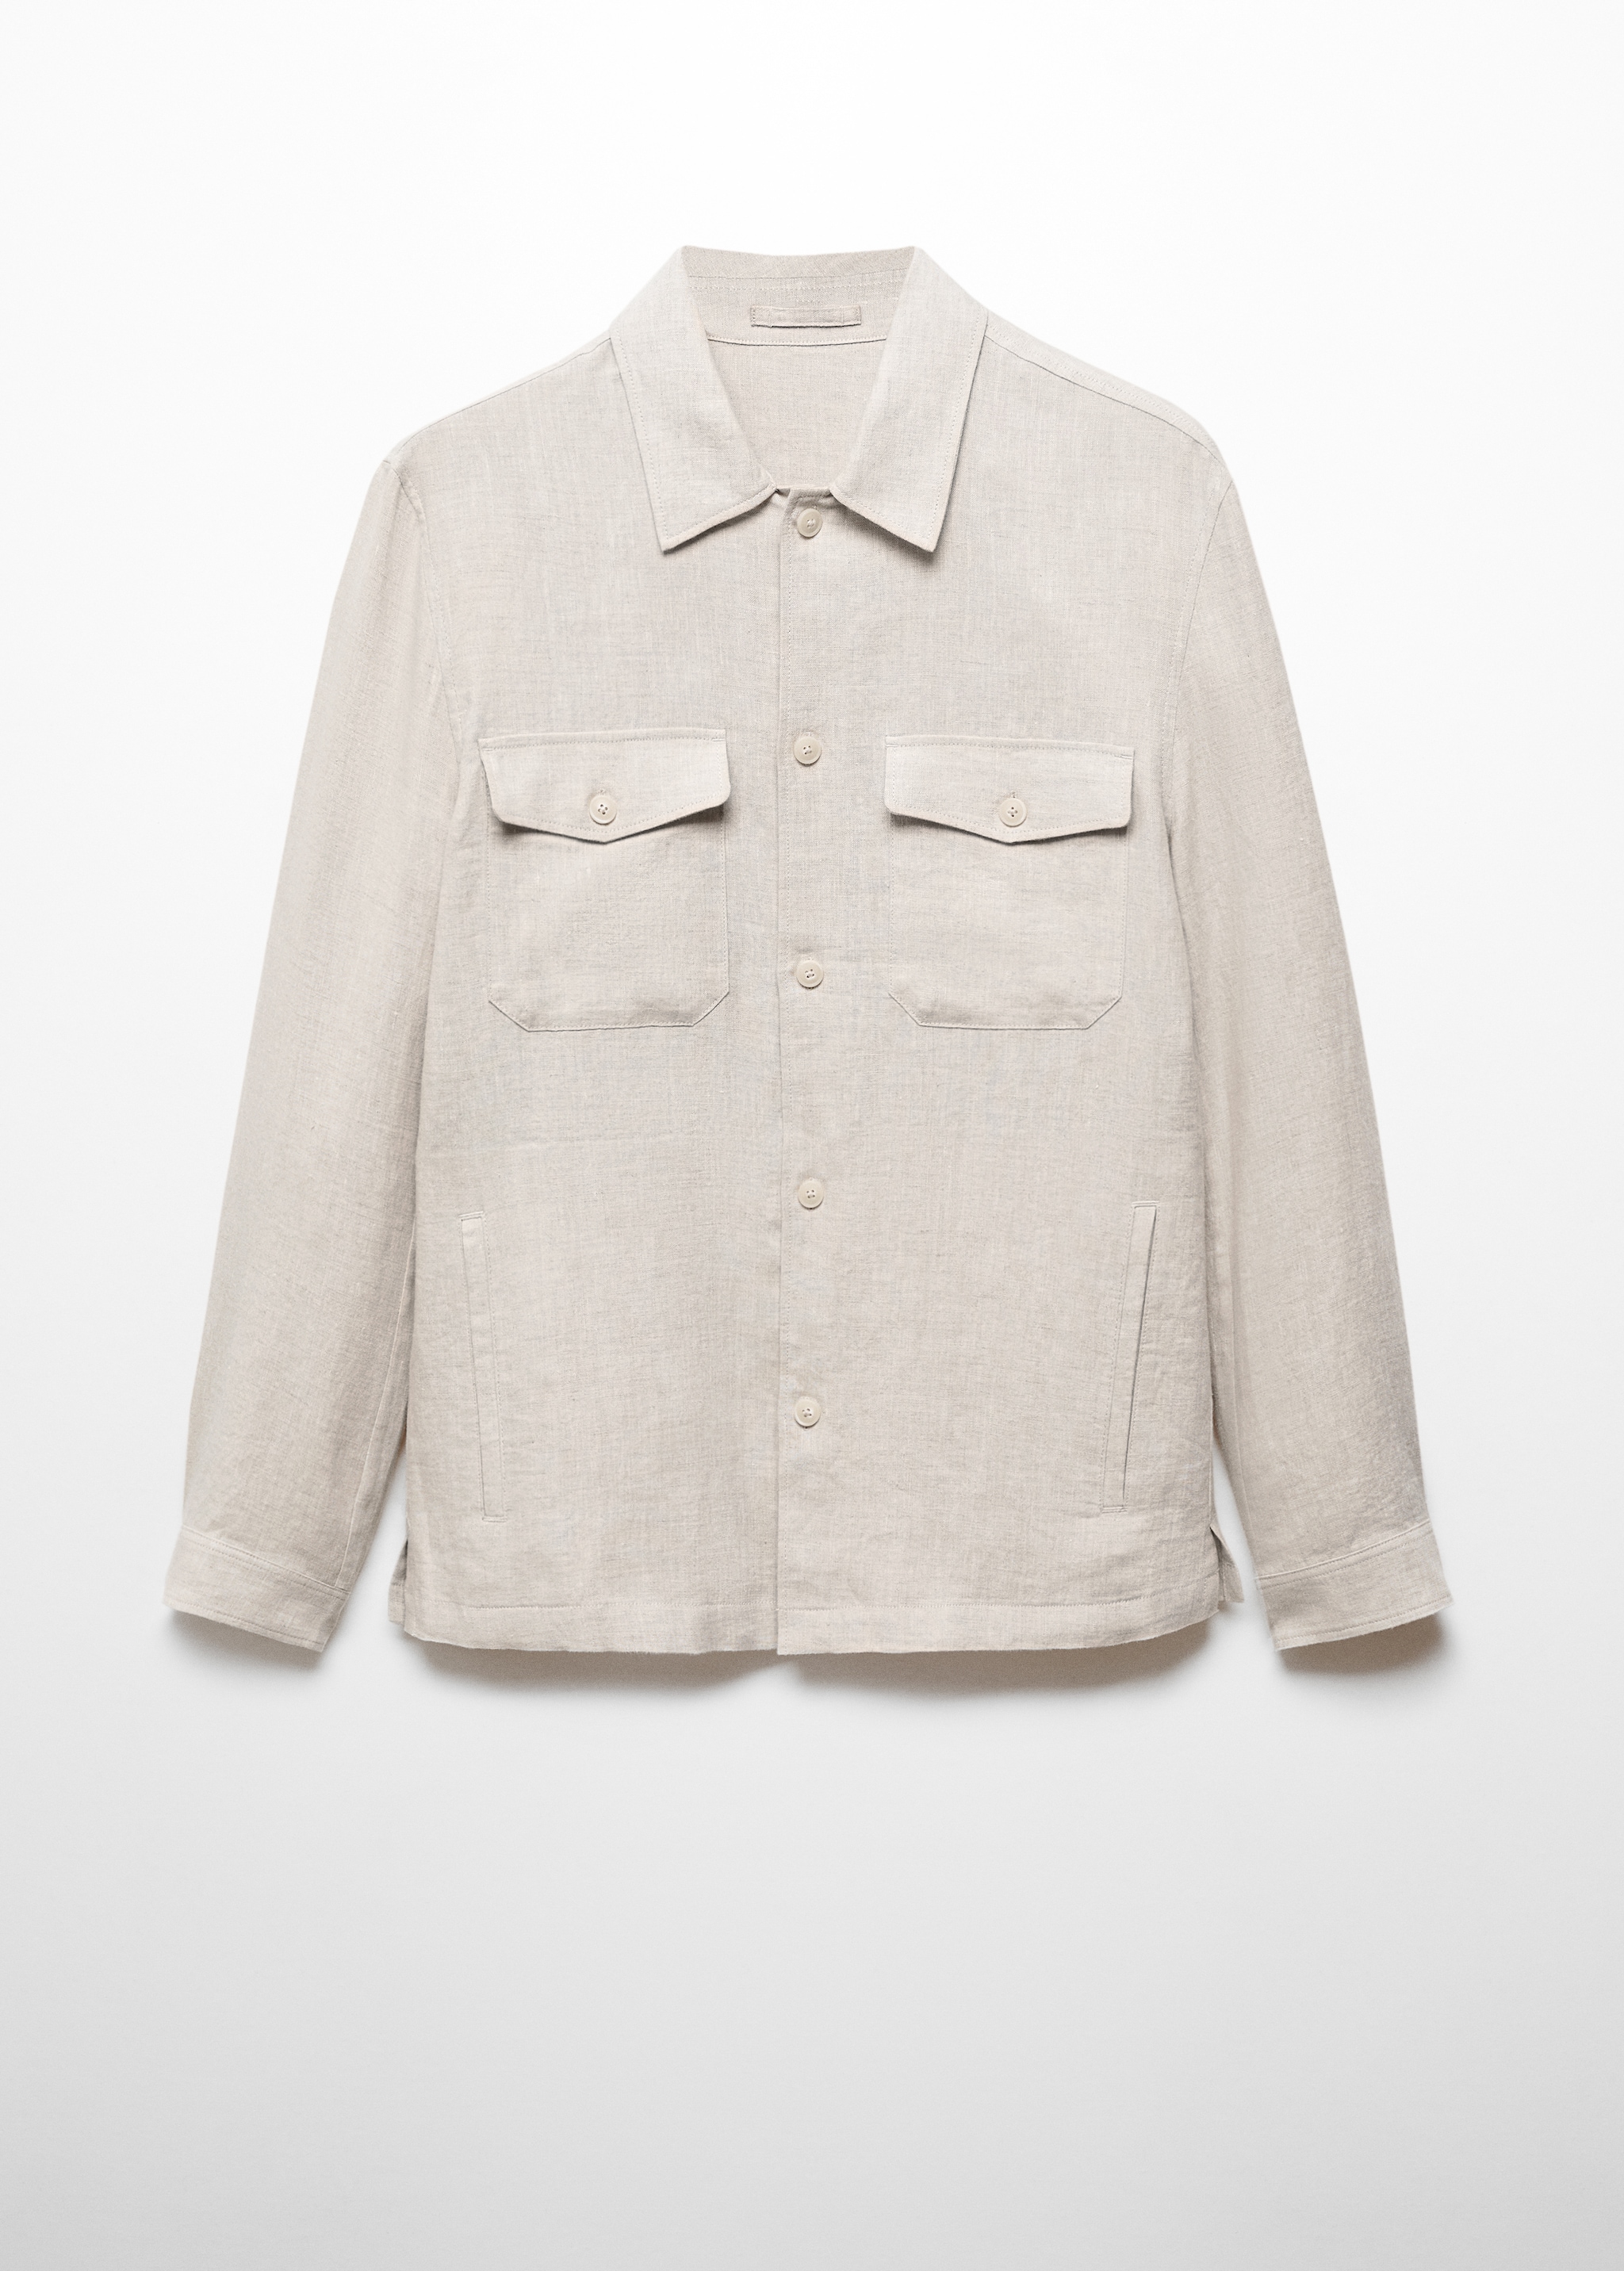 100% linen overshirt with pockets - Article without model